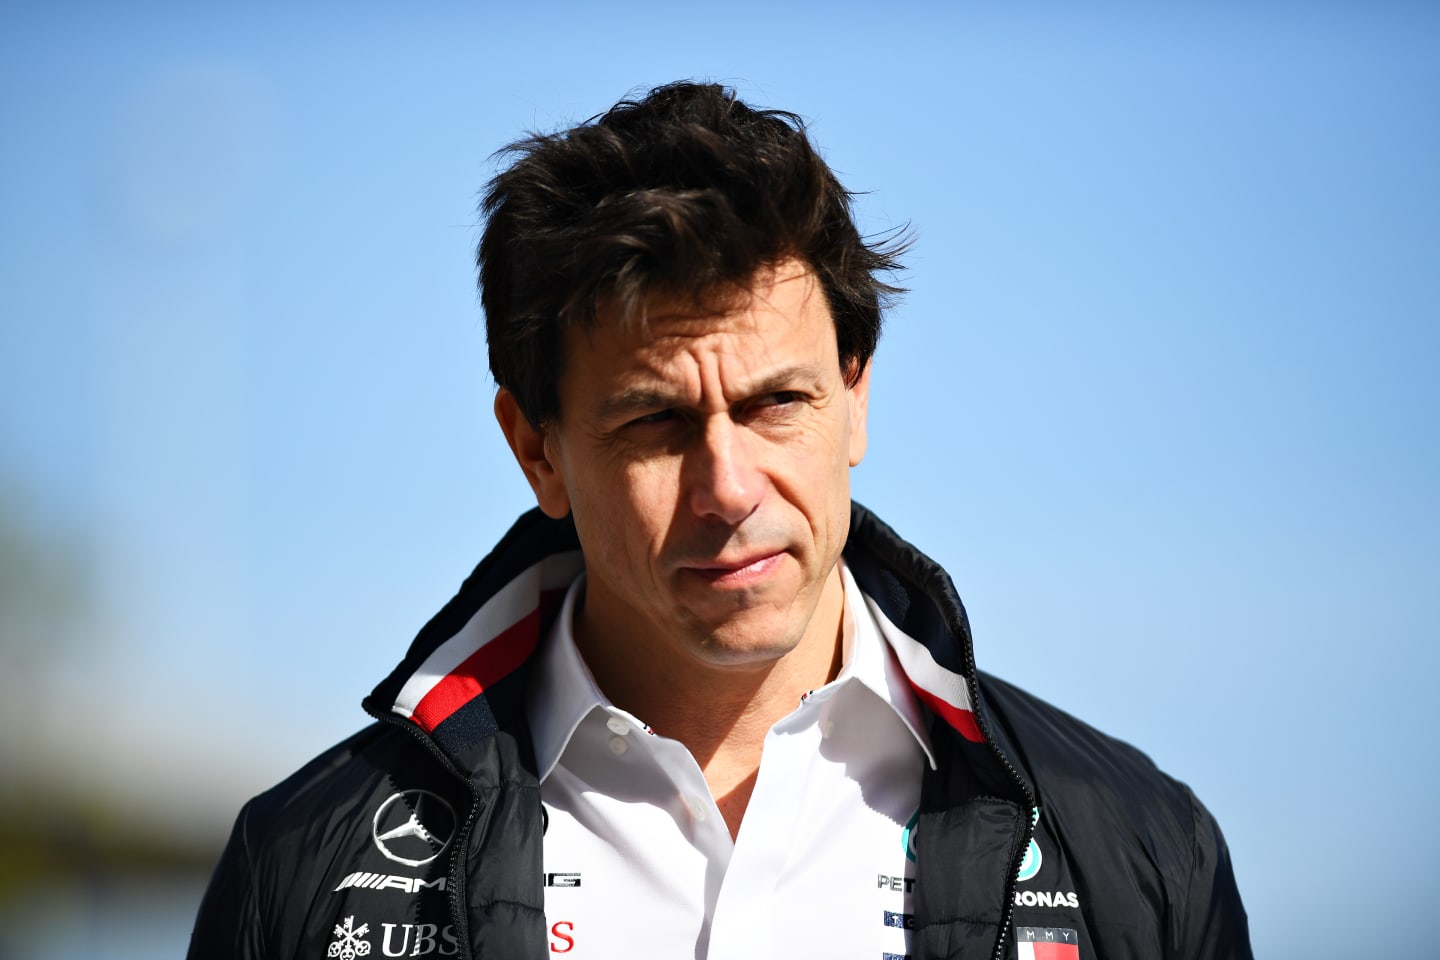 AUSTIN, TEXAS - NOVEMBER 02: Mercedes GP Executive Director Toto Wolff walks in the Paddock before